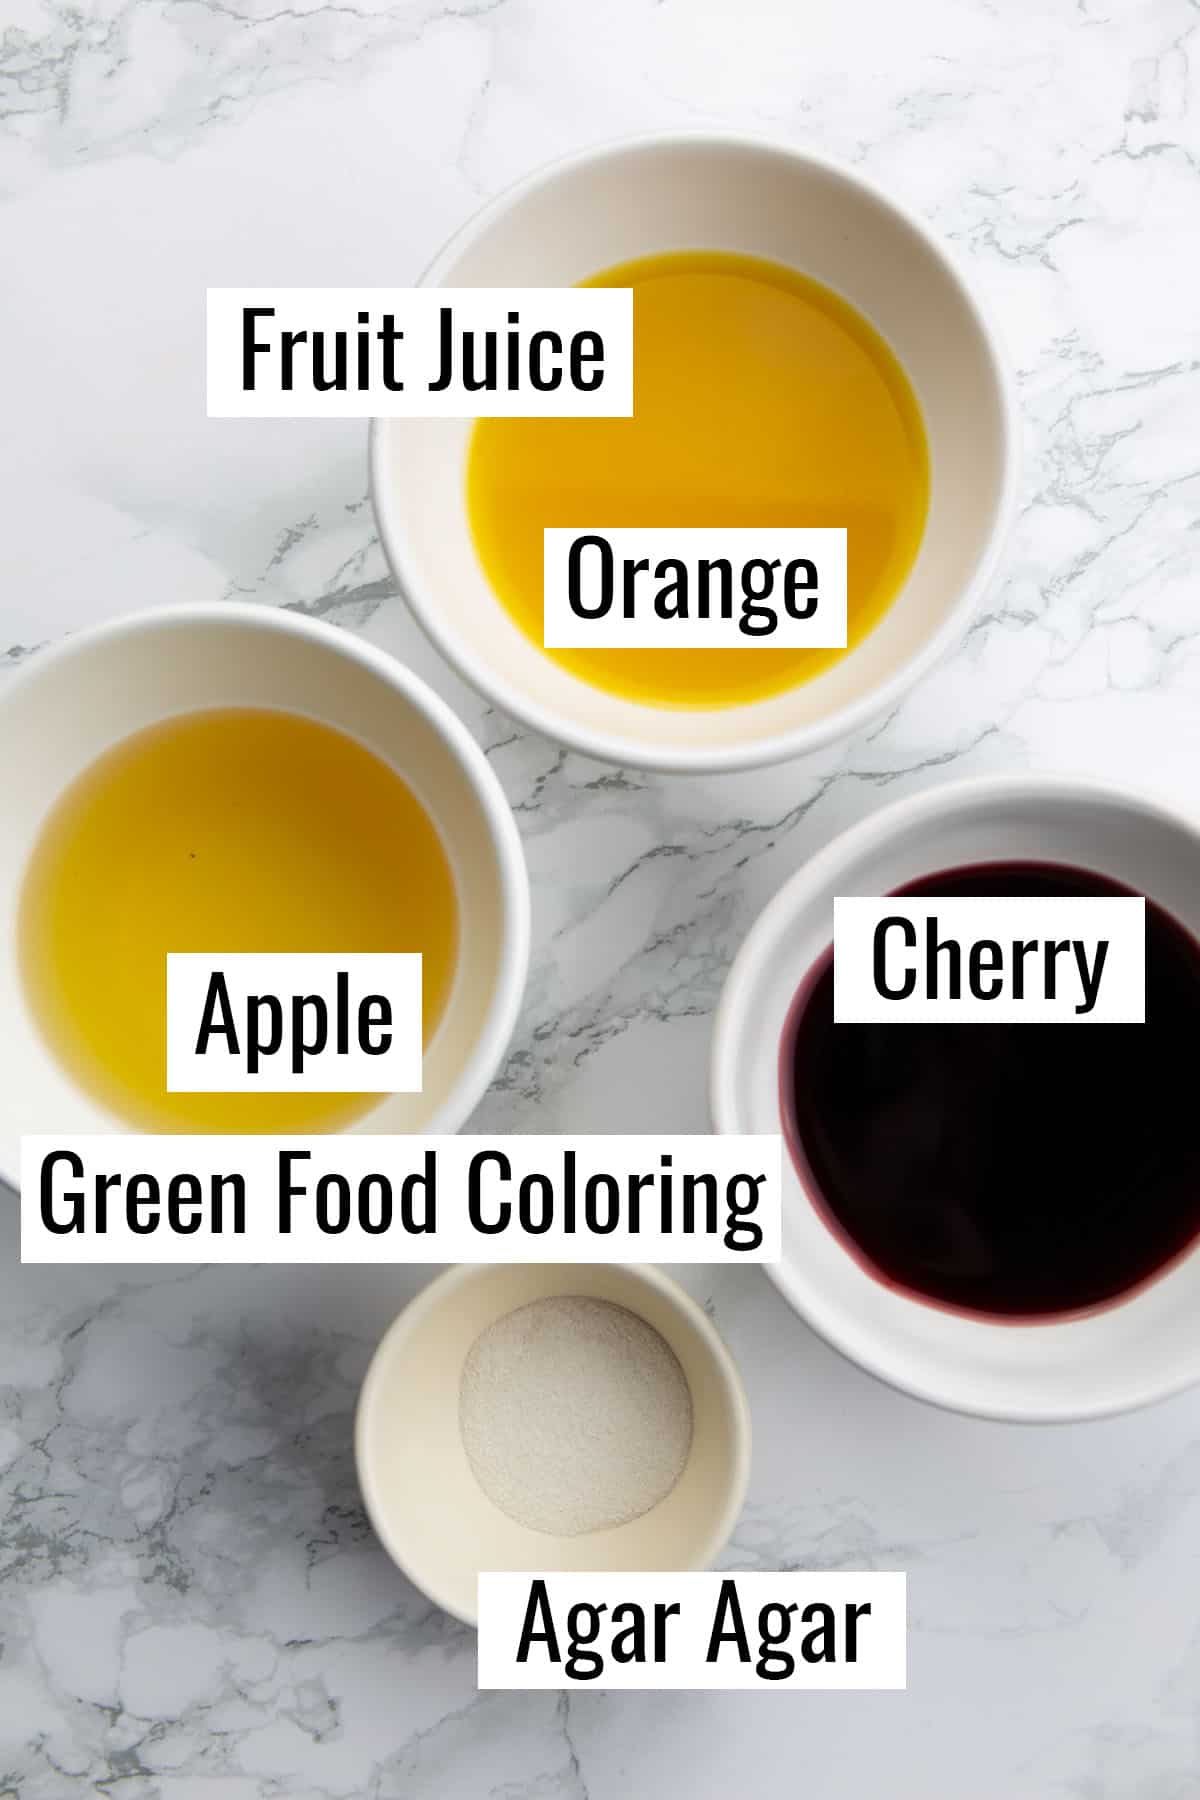 the ingredients that go into this recipe on a marble countertop 